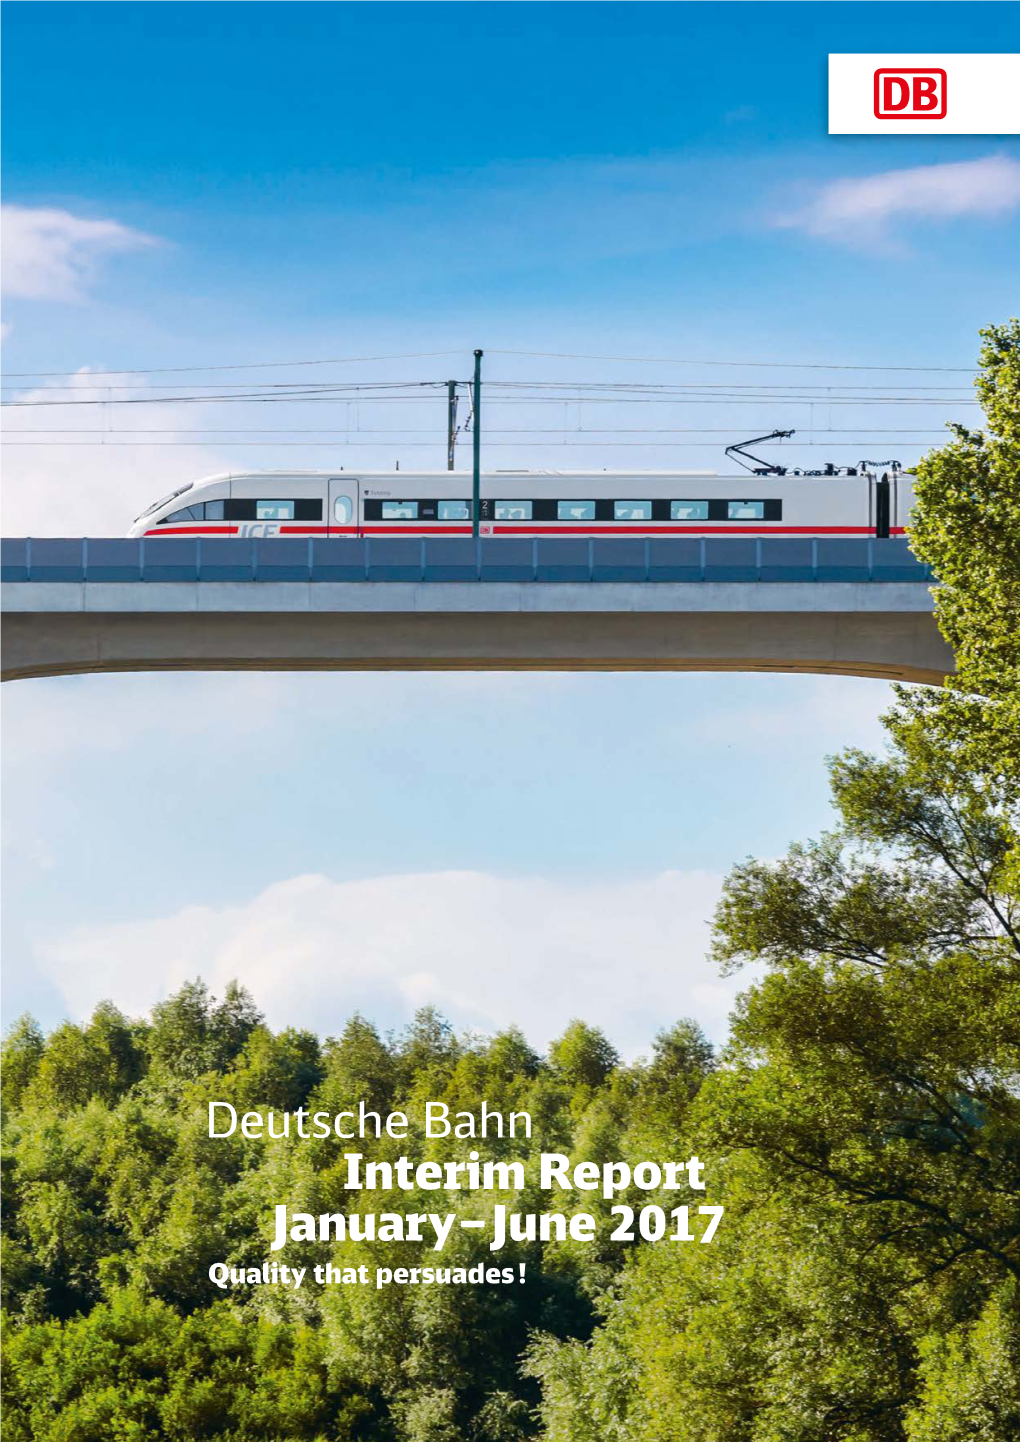 Deutsche Bahn Interim Report January – June 2017 Quality That Persuades ! at a Glance